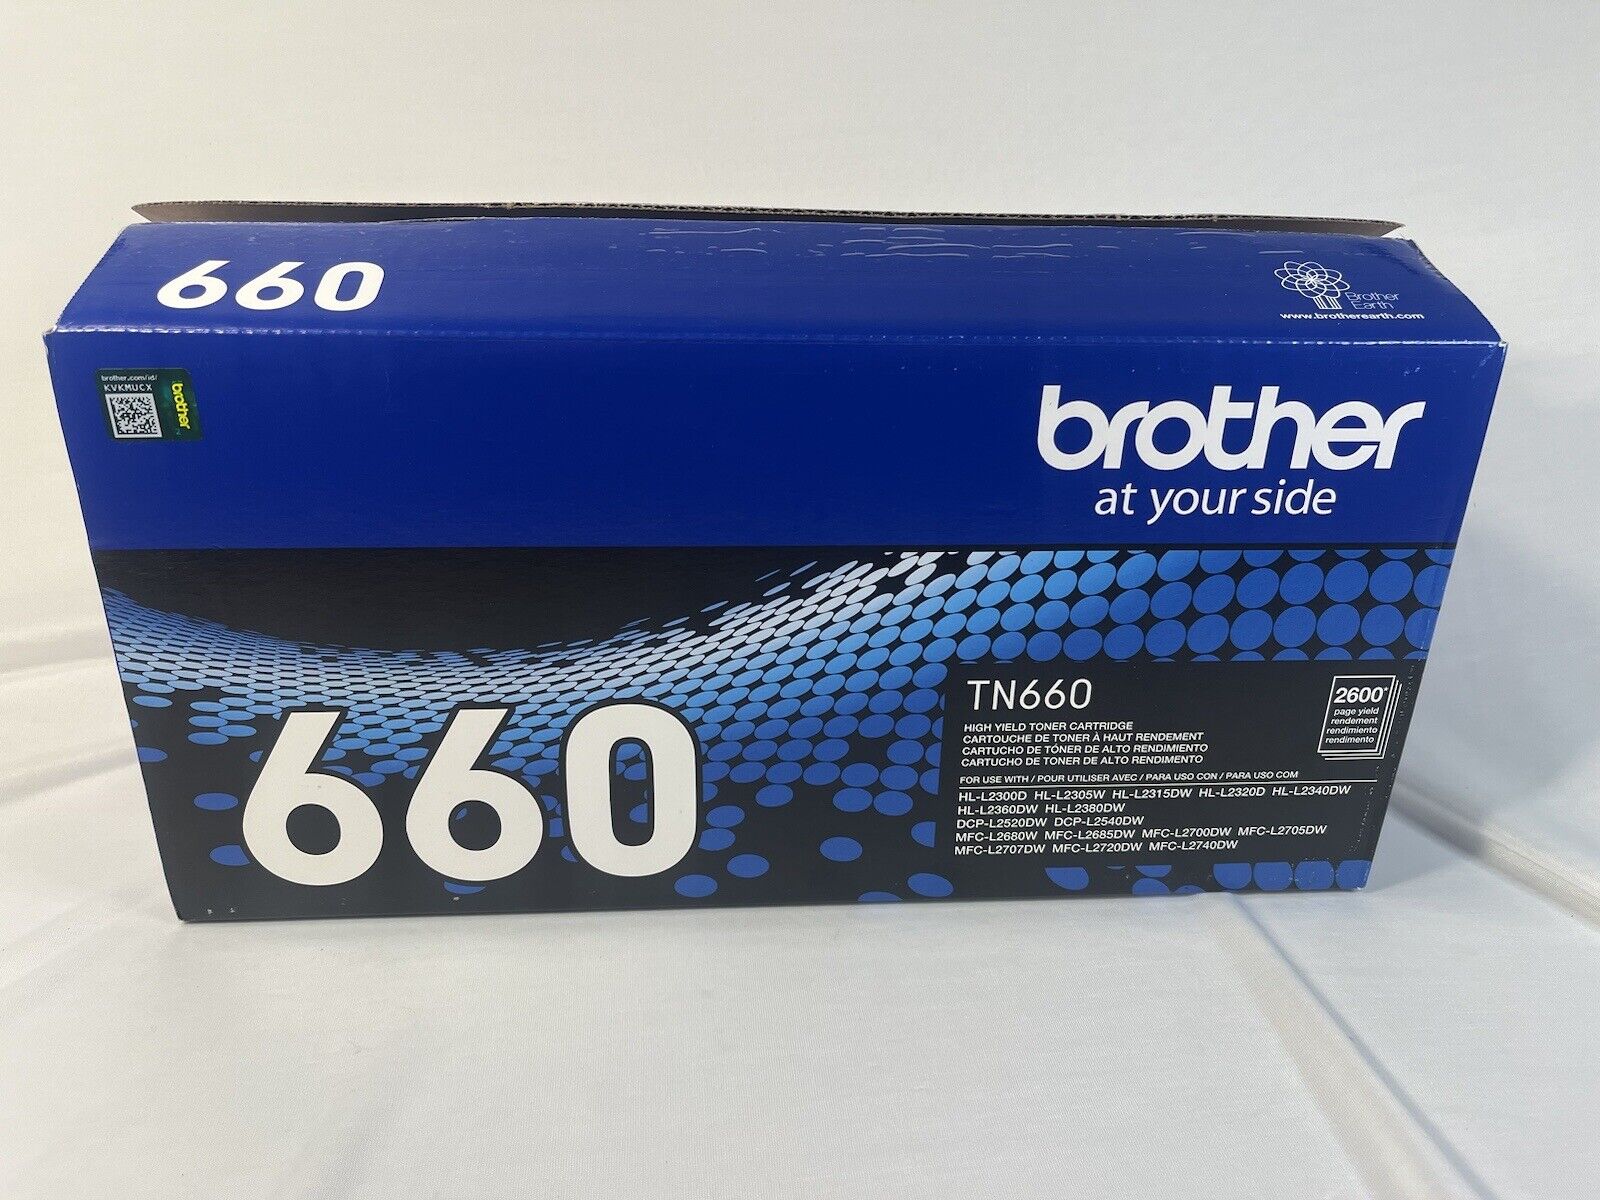 Brother TN660 High Yield Toner Cartridge New in Box Unopened